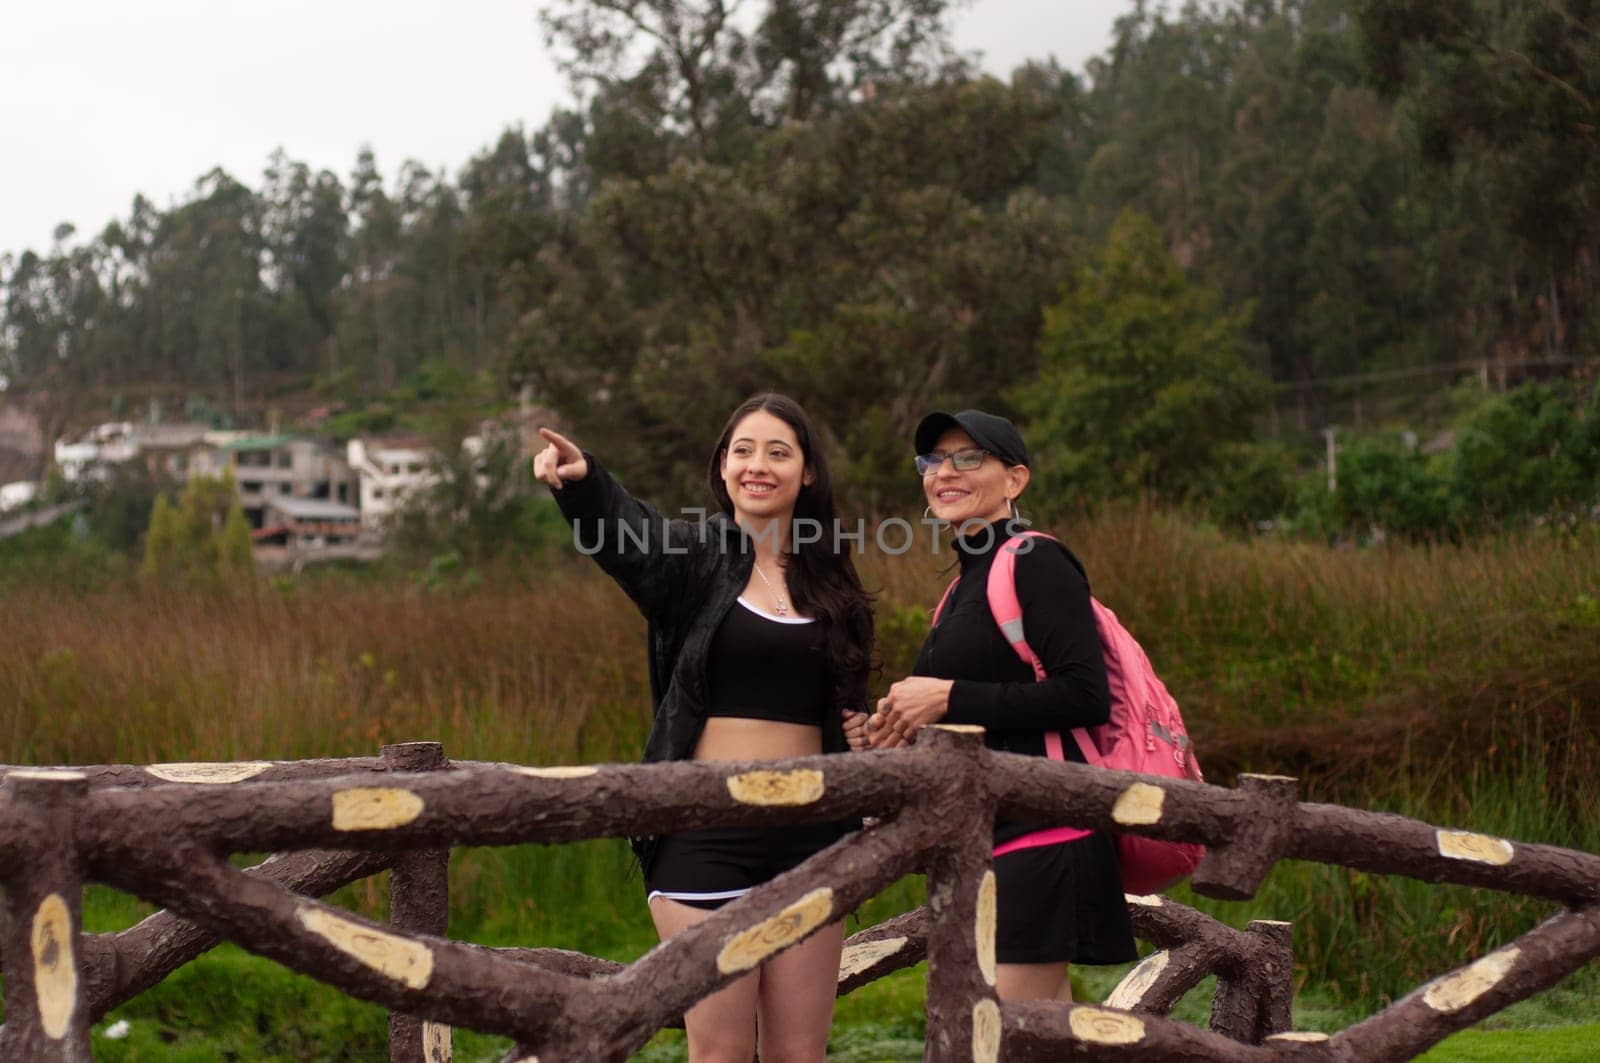 mother and daughter on a wooden bridge in a vegetation zone, the daughter points her finger to the right with an excited expression, the mother watches attentively. women's day by Raulmartin